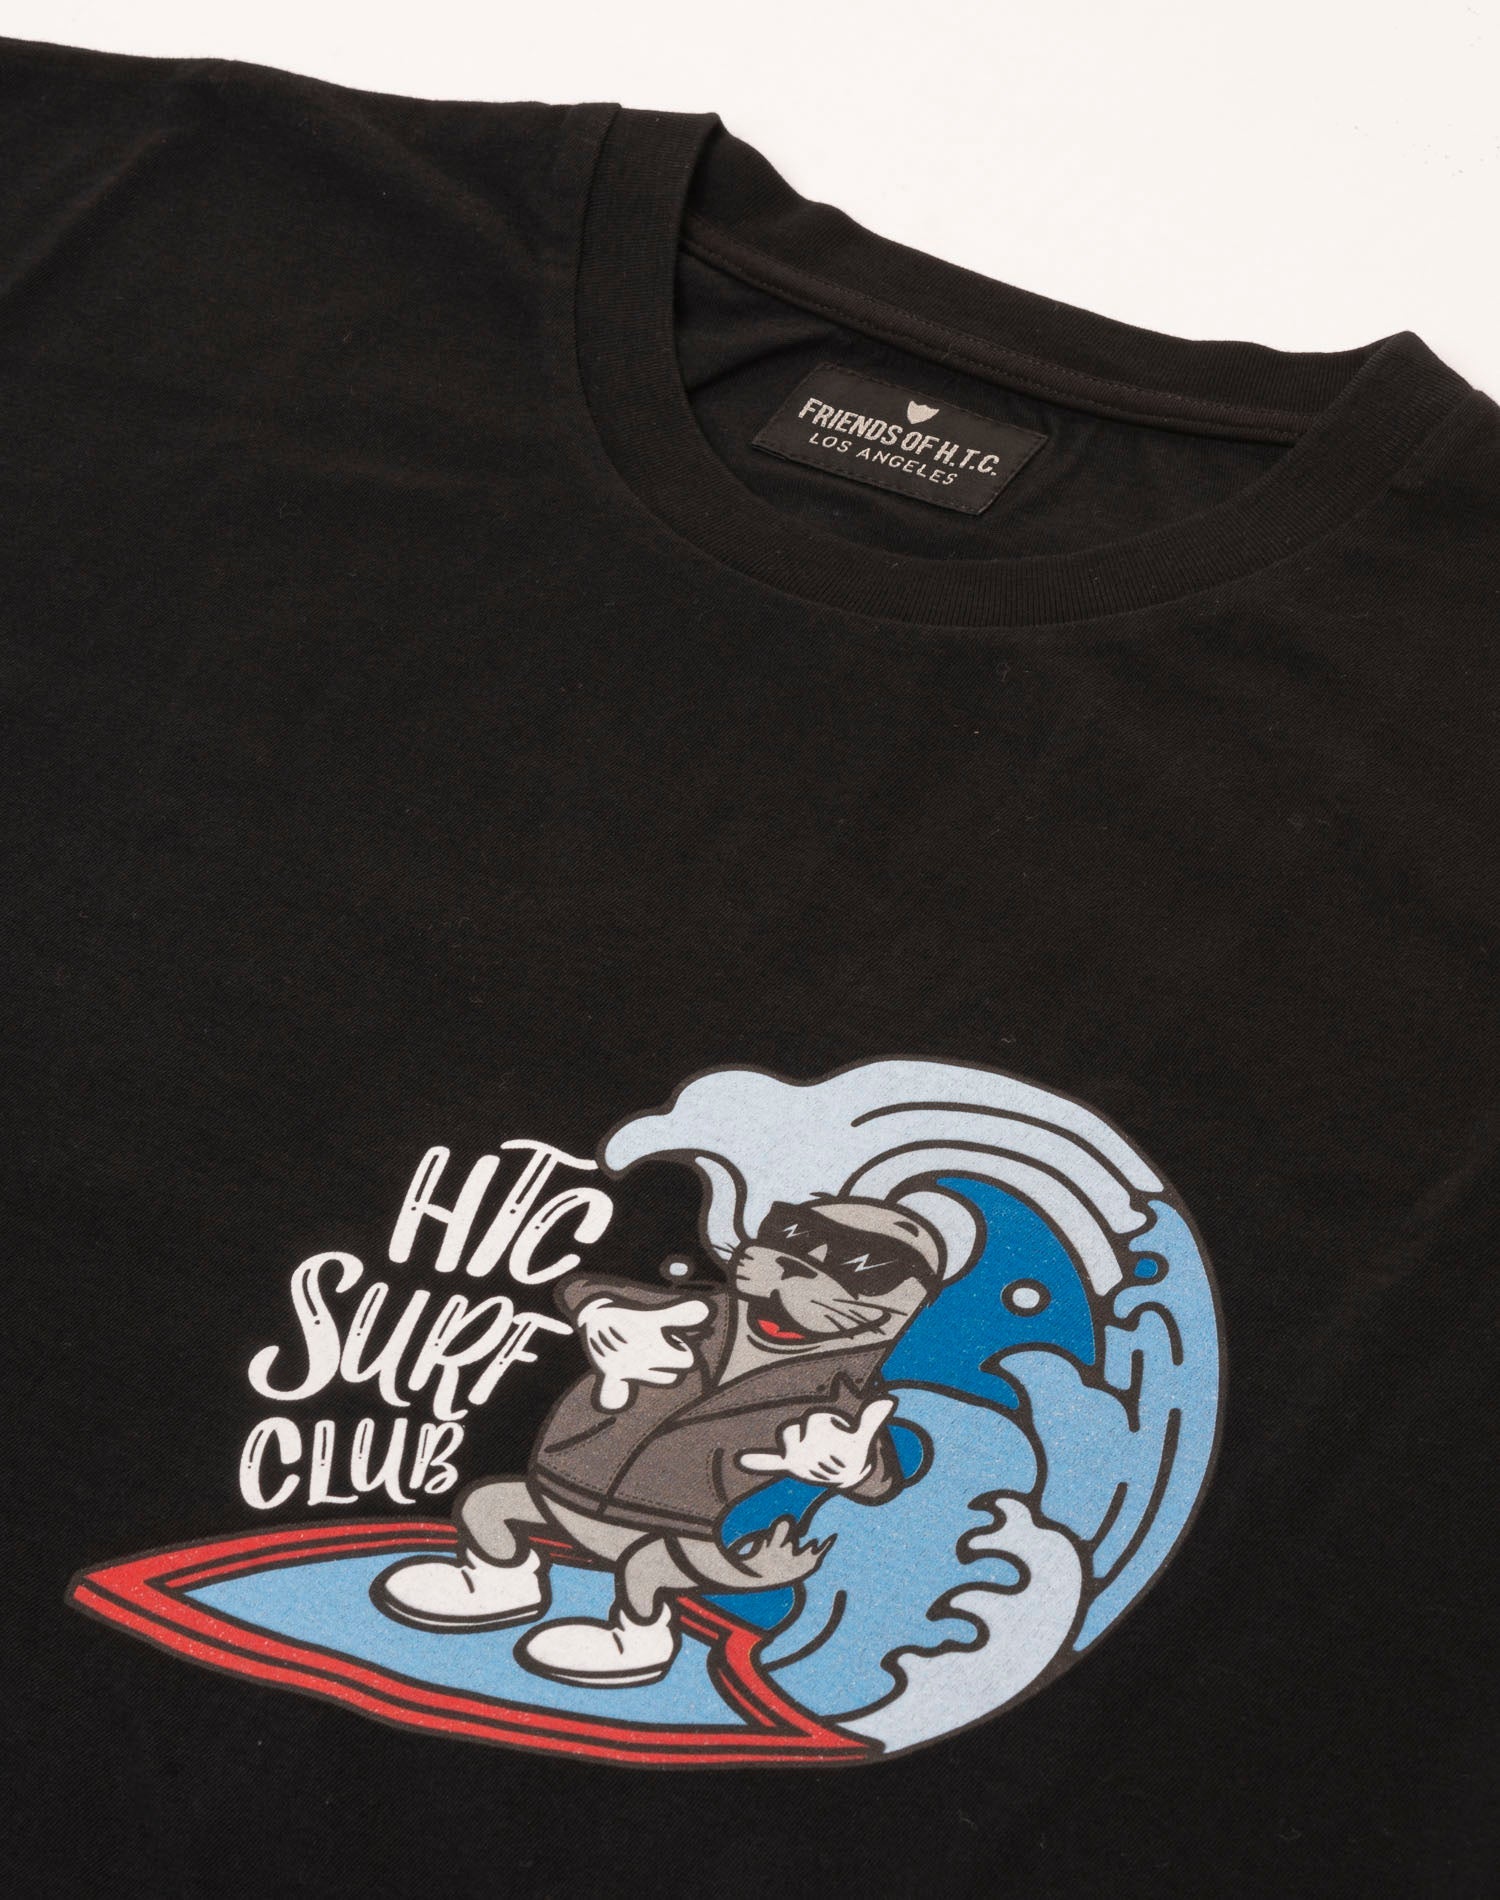 SURF CLUB T-SHIRT Limited Edition Crew neck t shirt with ‘HTC SURF CLUB’ print. Regular fit. 100% cotton. Made in Italy. HTC LOS ANGELES